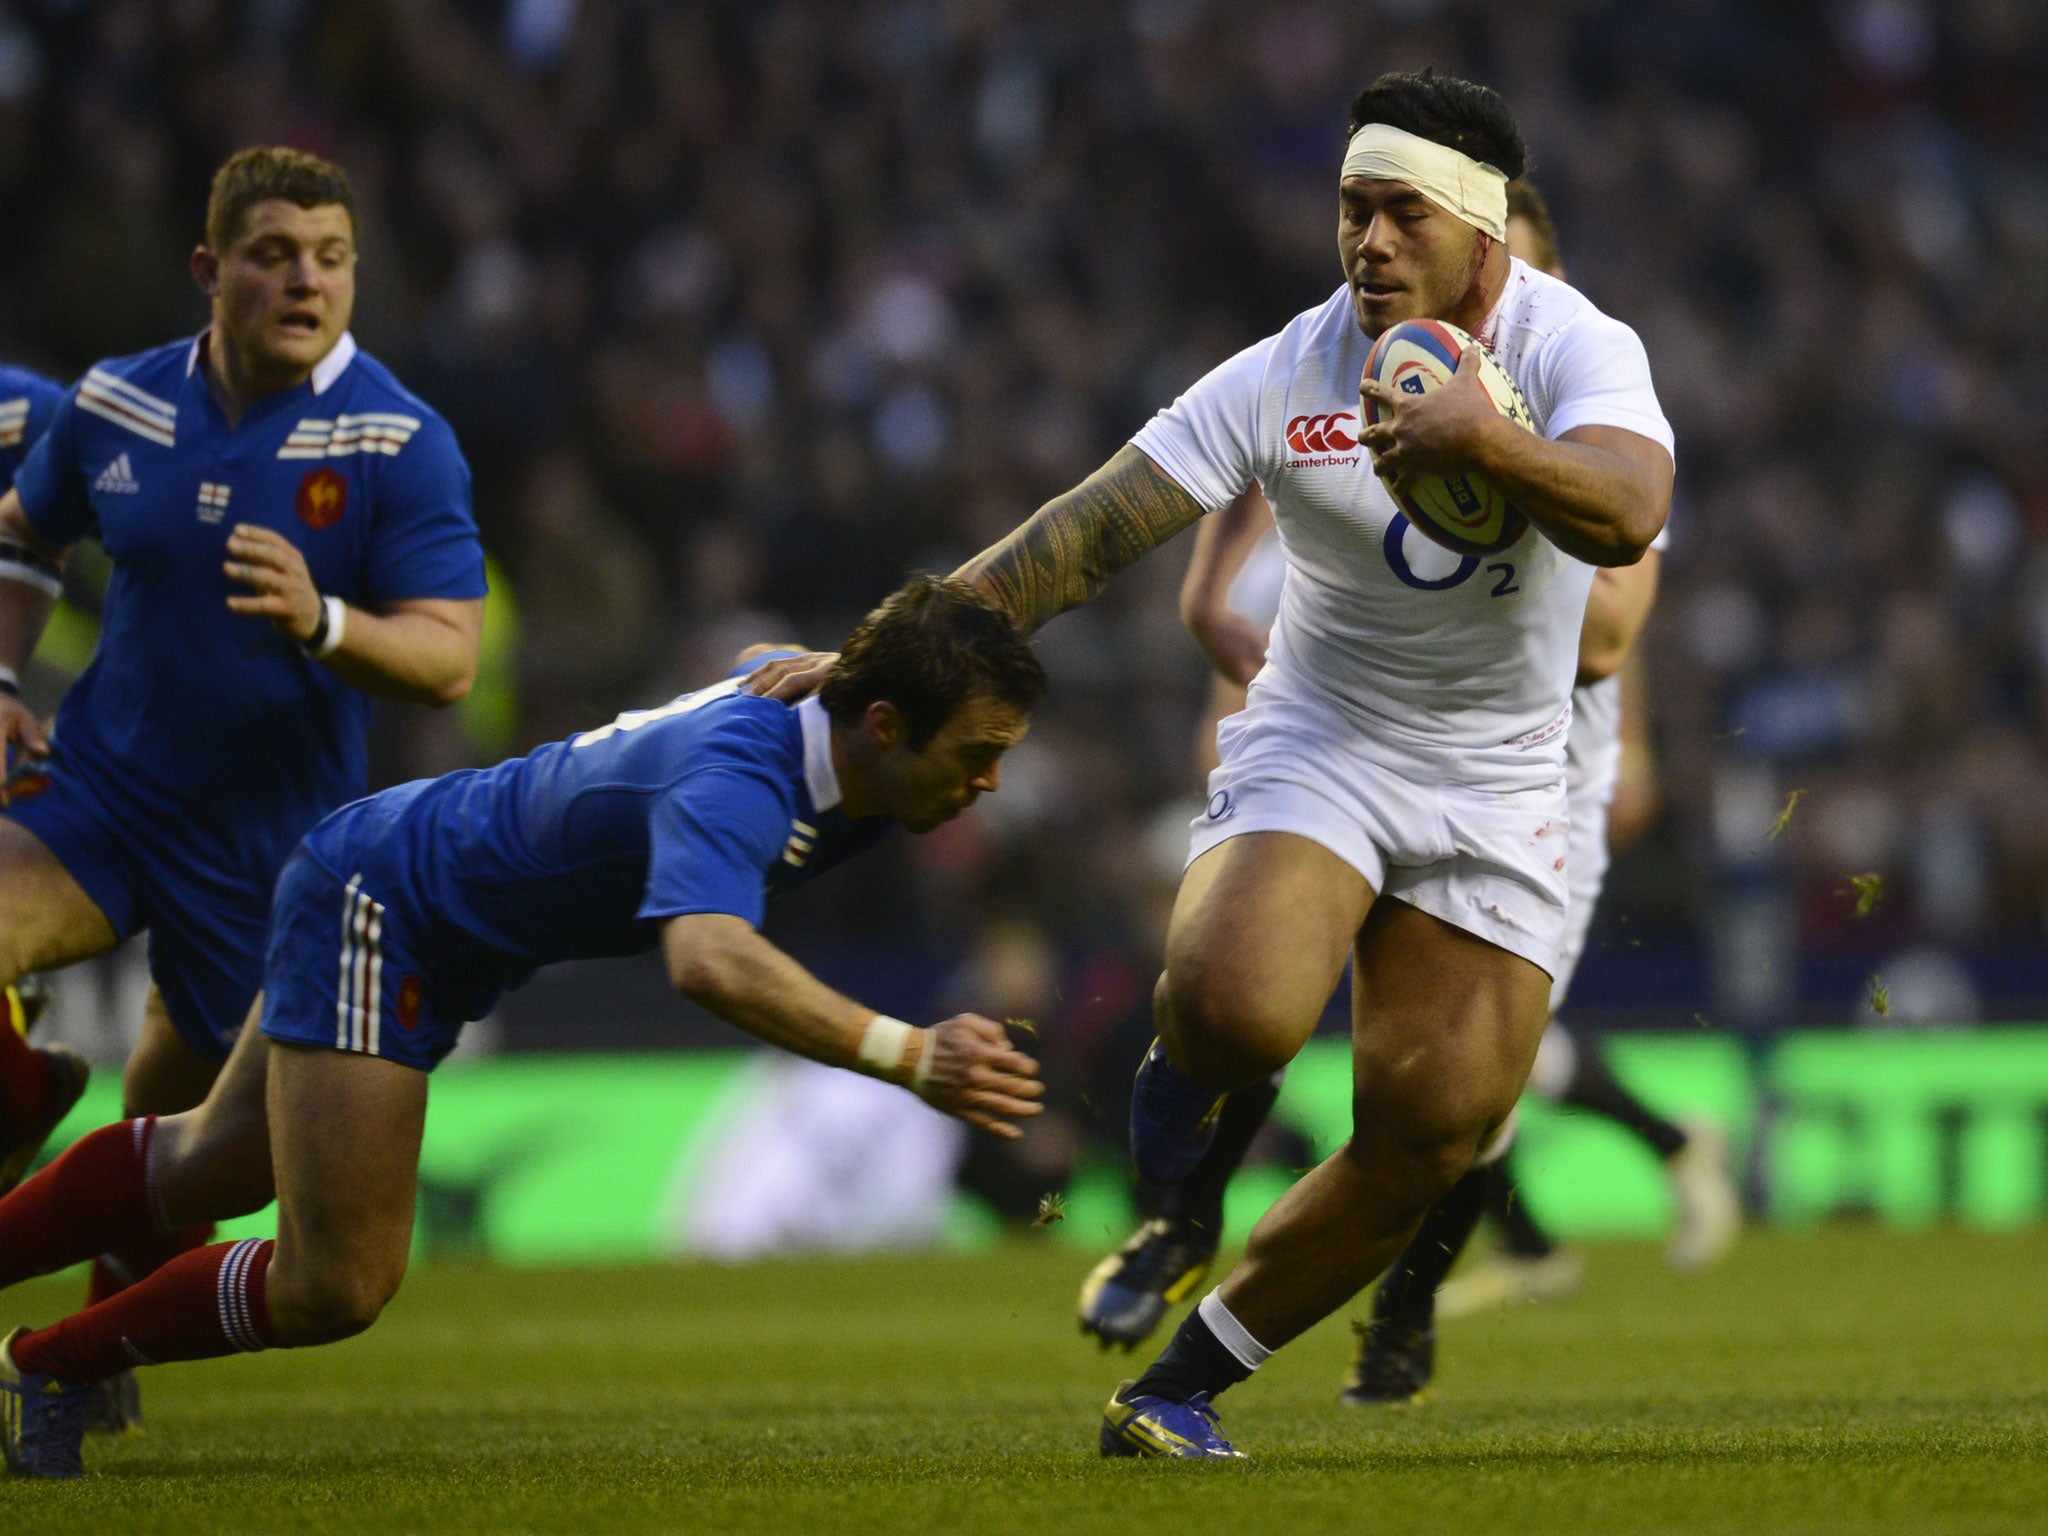 Manu Tuilagi was on top form for England today